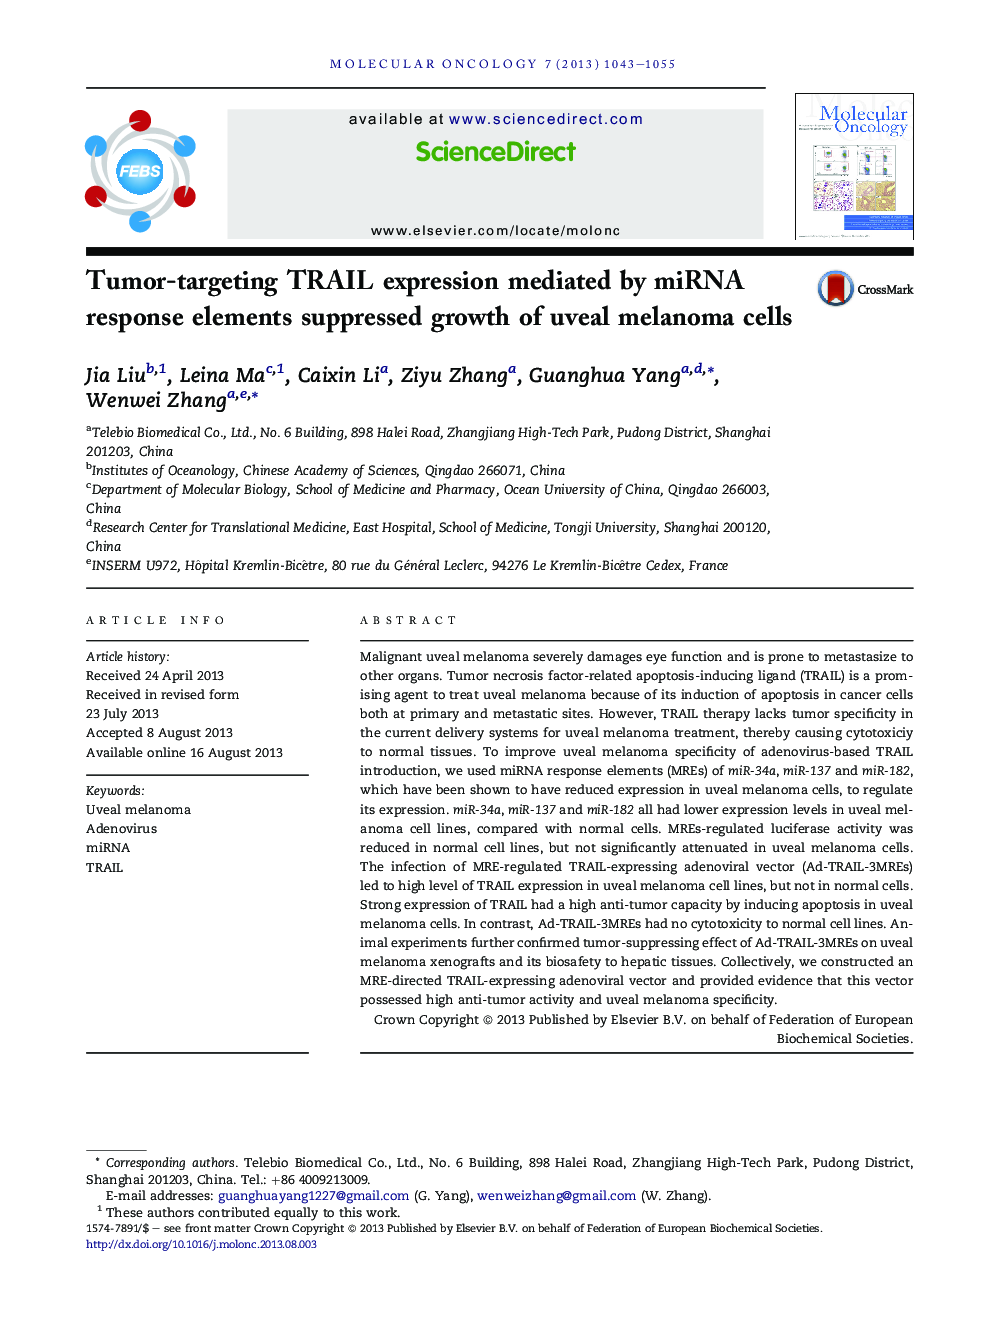 Tumor-targeting TRAIL expression mediated by miRNA response elements suppressed growth of uveal melanoma cells